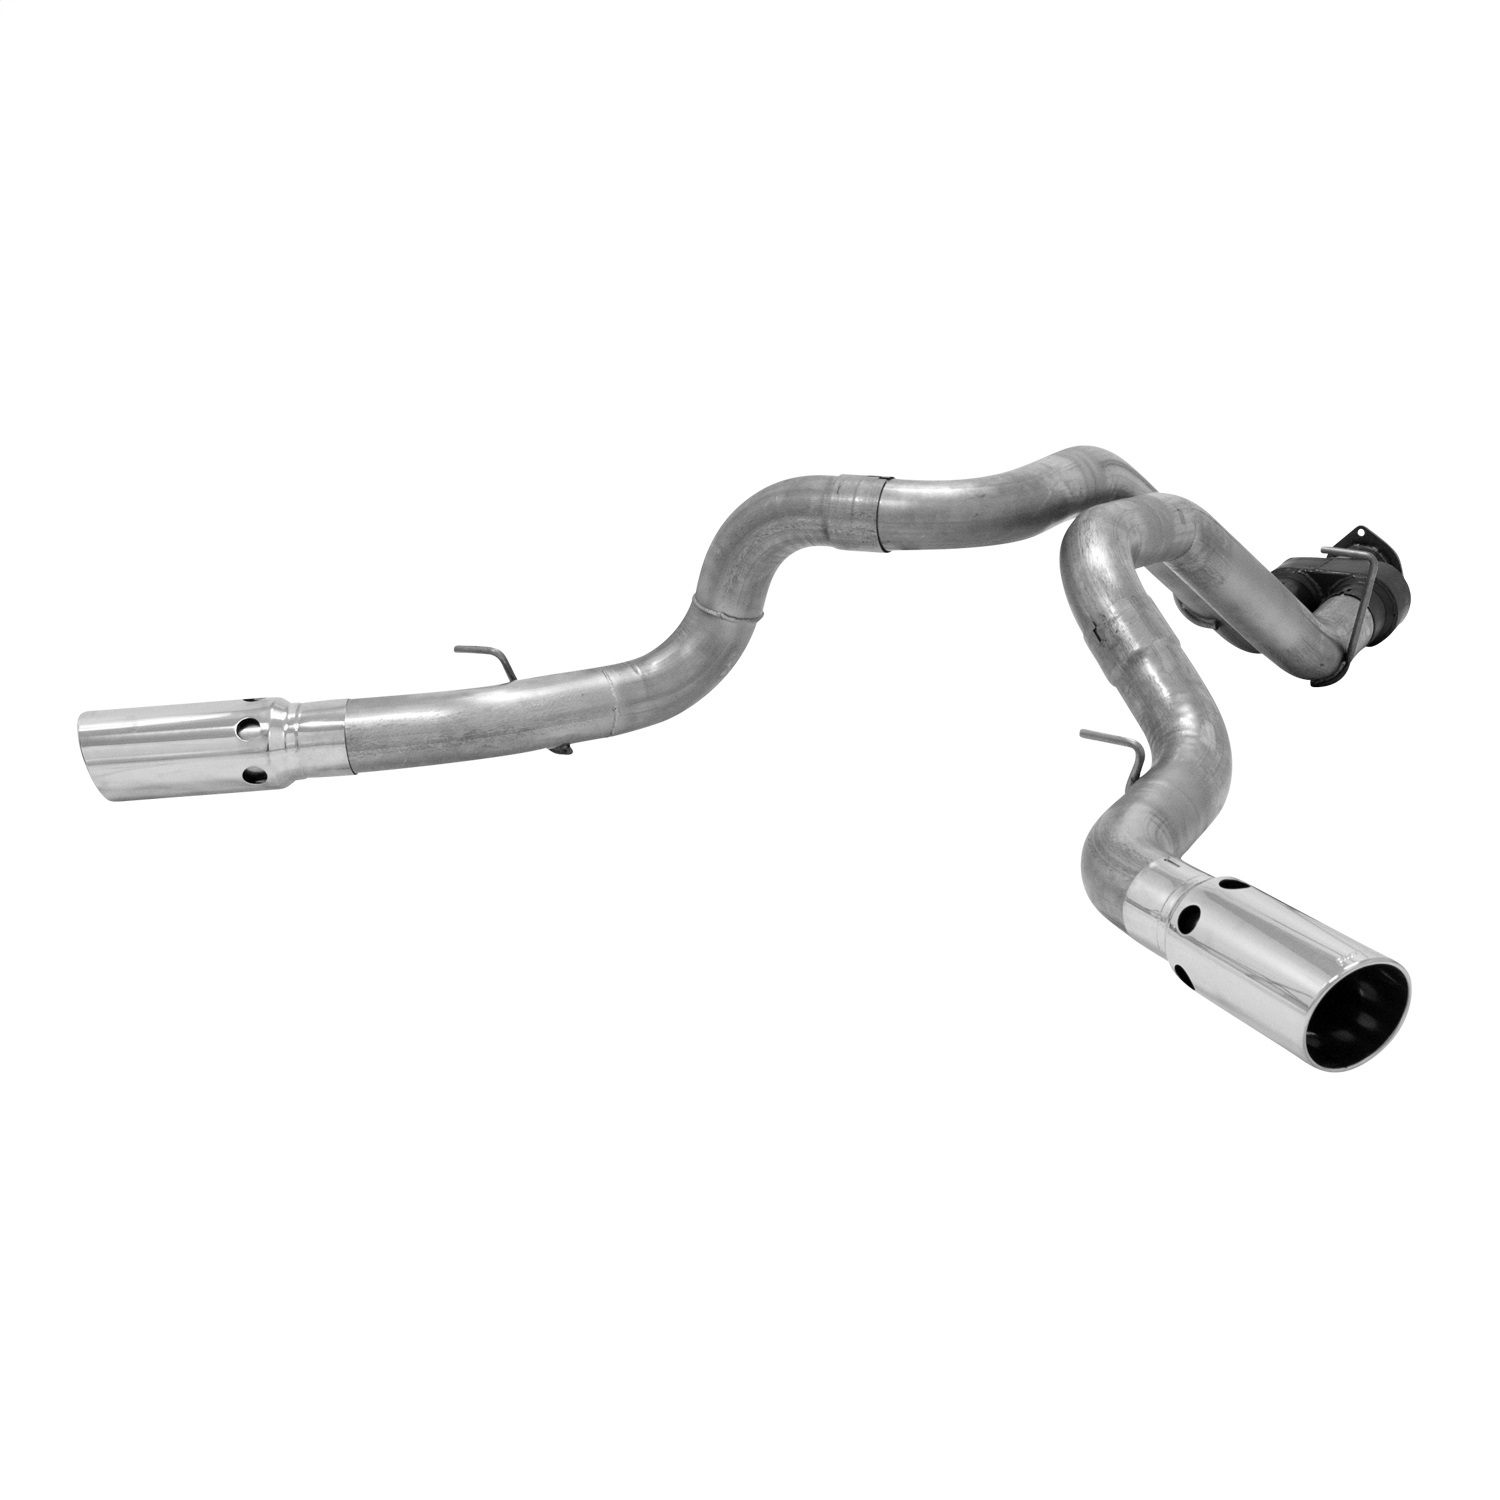 Flowmaster Flowmaster 817642 Force II Axle Back Exhaust System